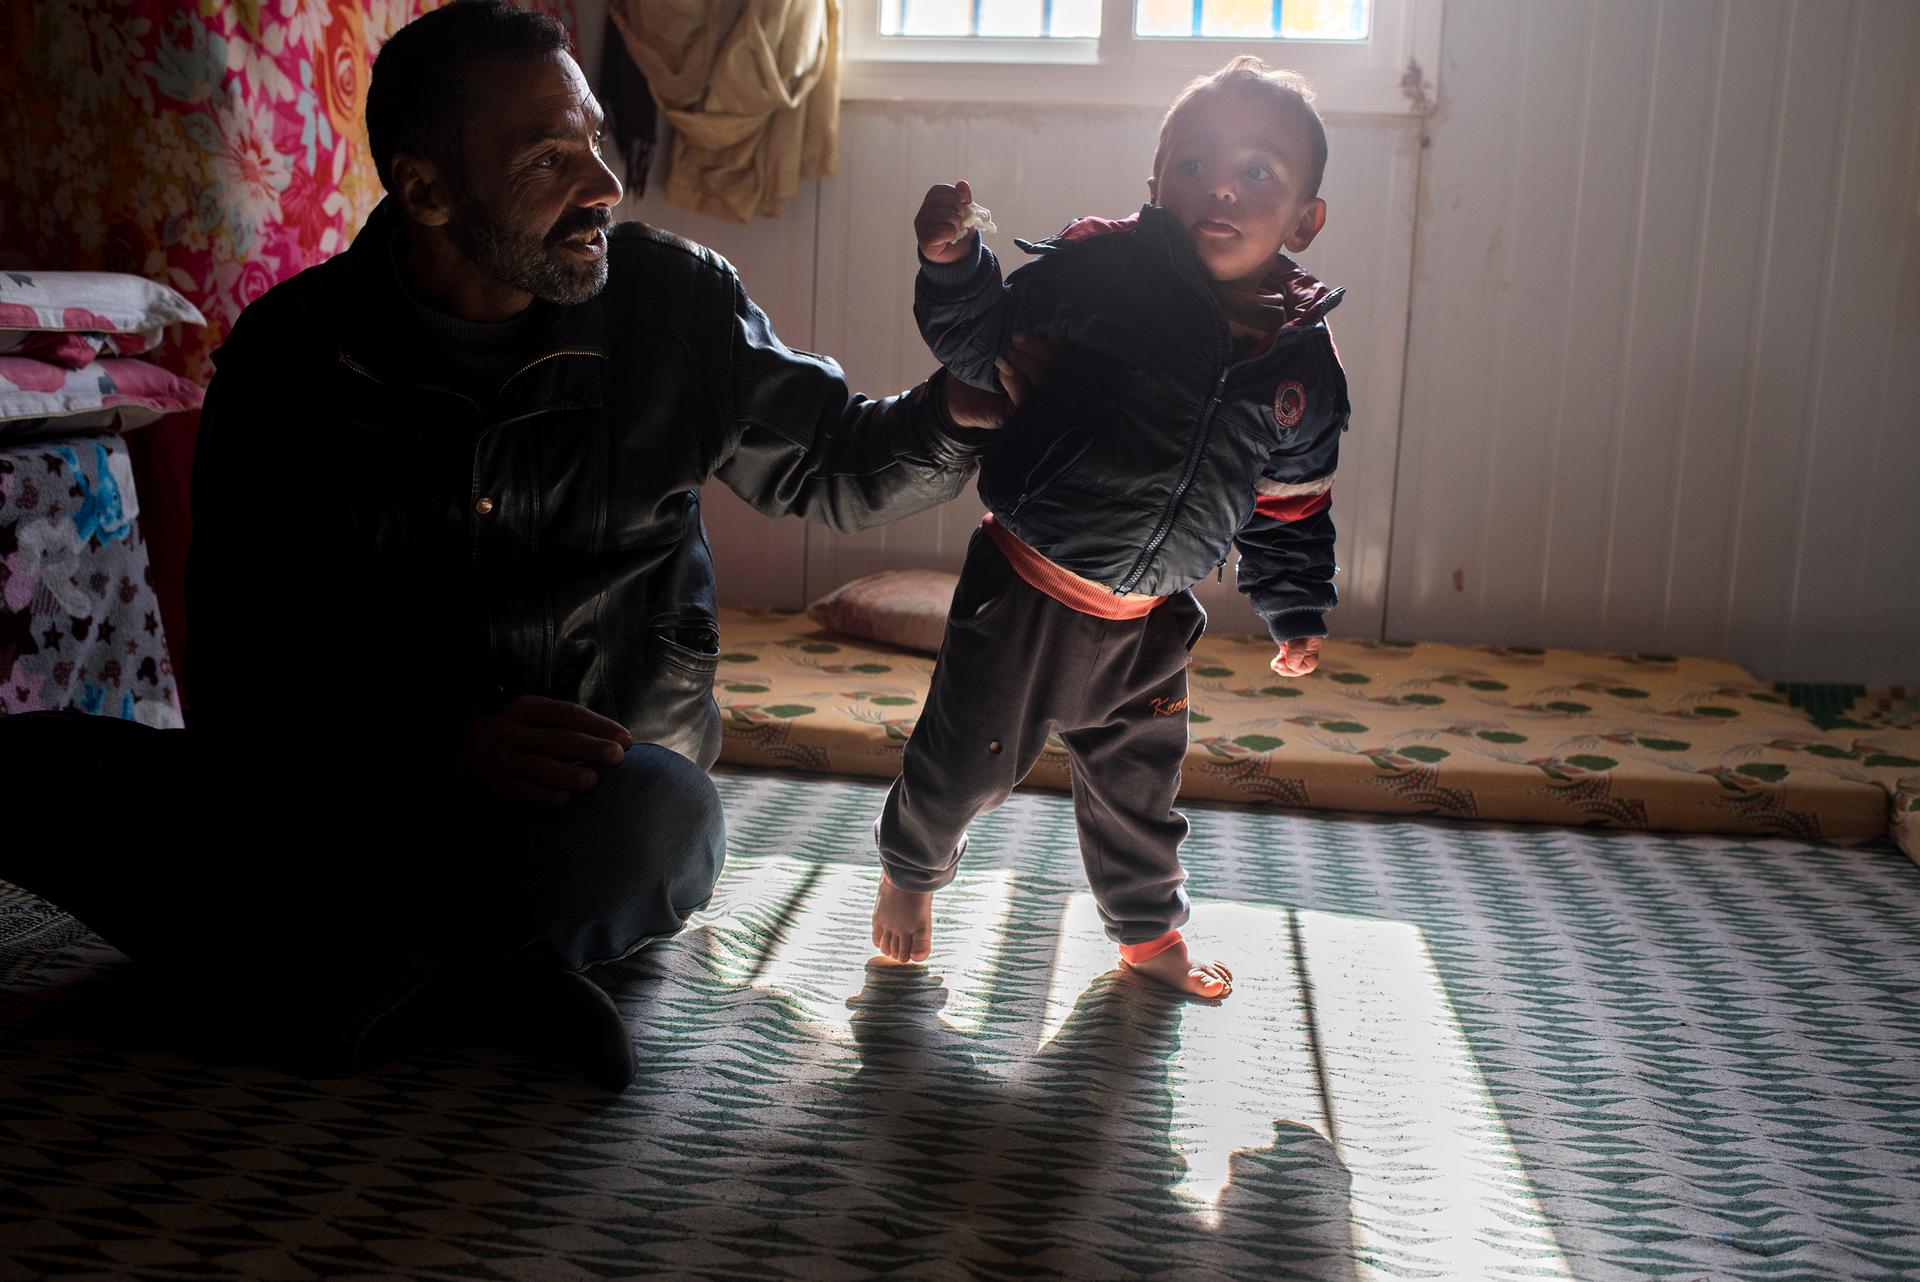 Hamdi Ahmad Laghras, 46, plays with his 1-year-old son Ibrahim in the family's metal shelter in the camp. Laghras and his wife Um Ala have had two children since fleeing Syria in 2011.